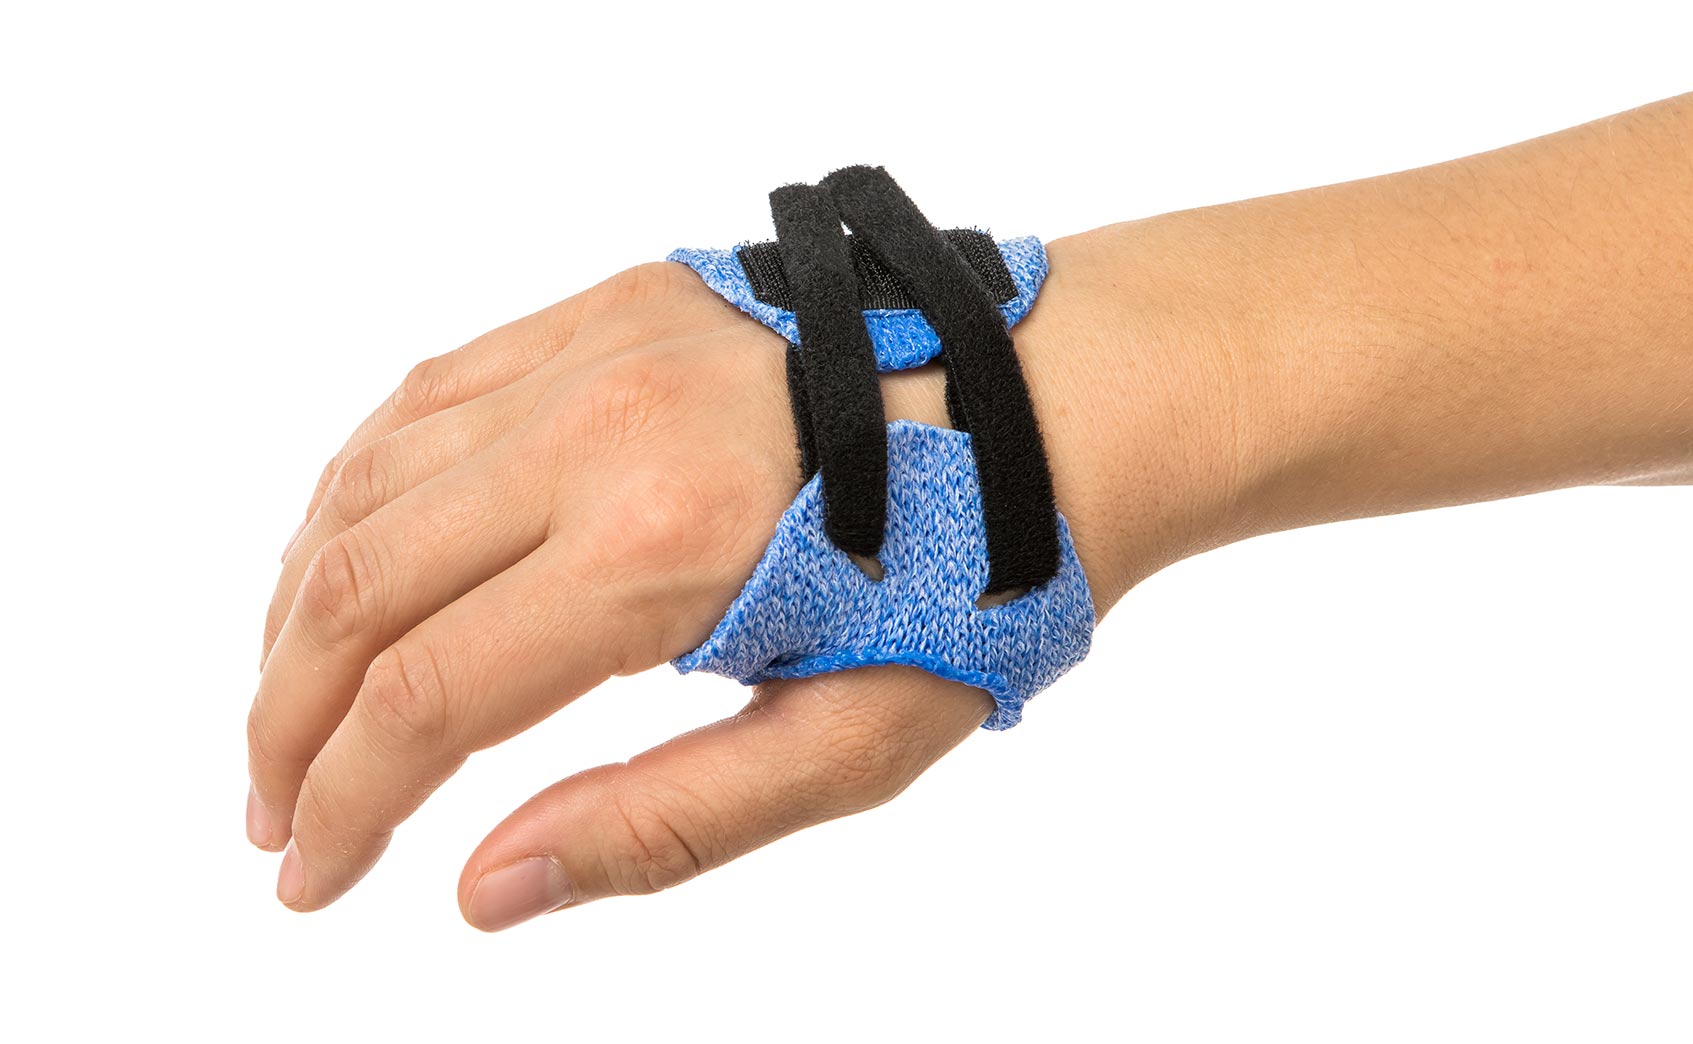 Blue Orficast orthosis with hook-and-loop strapping